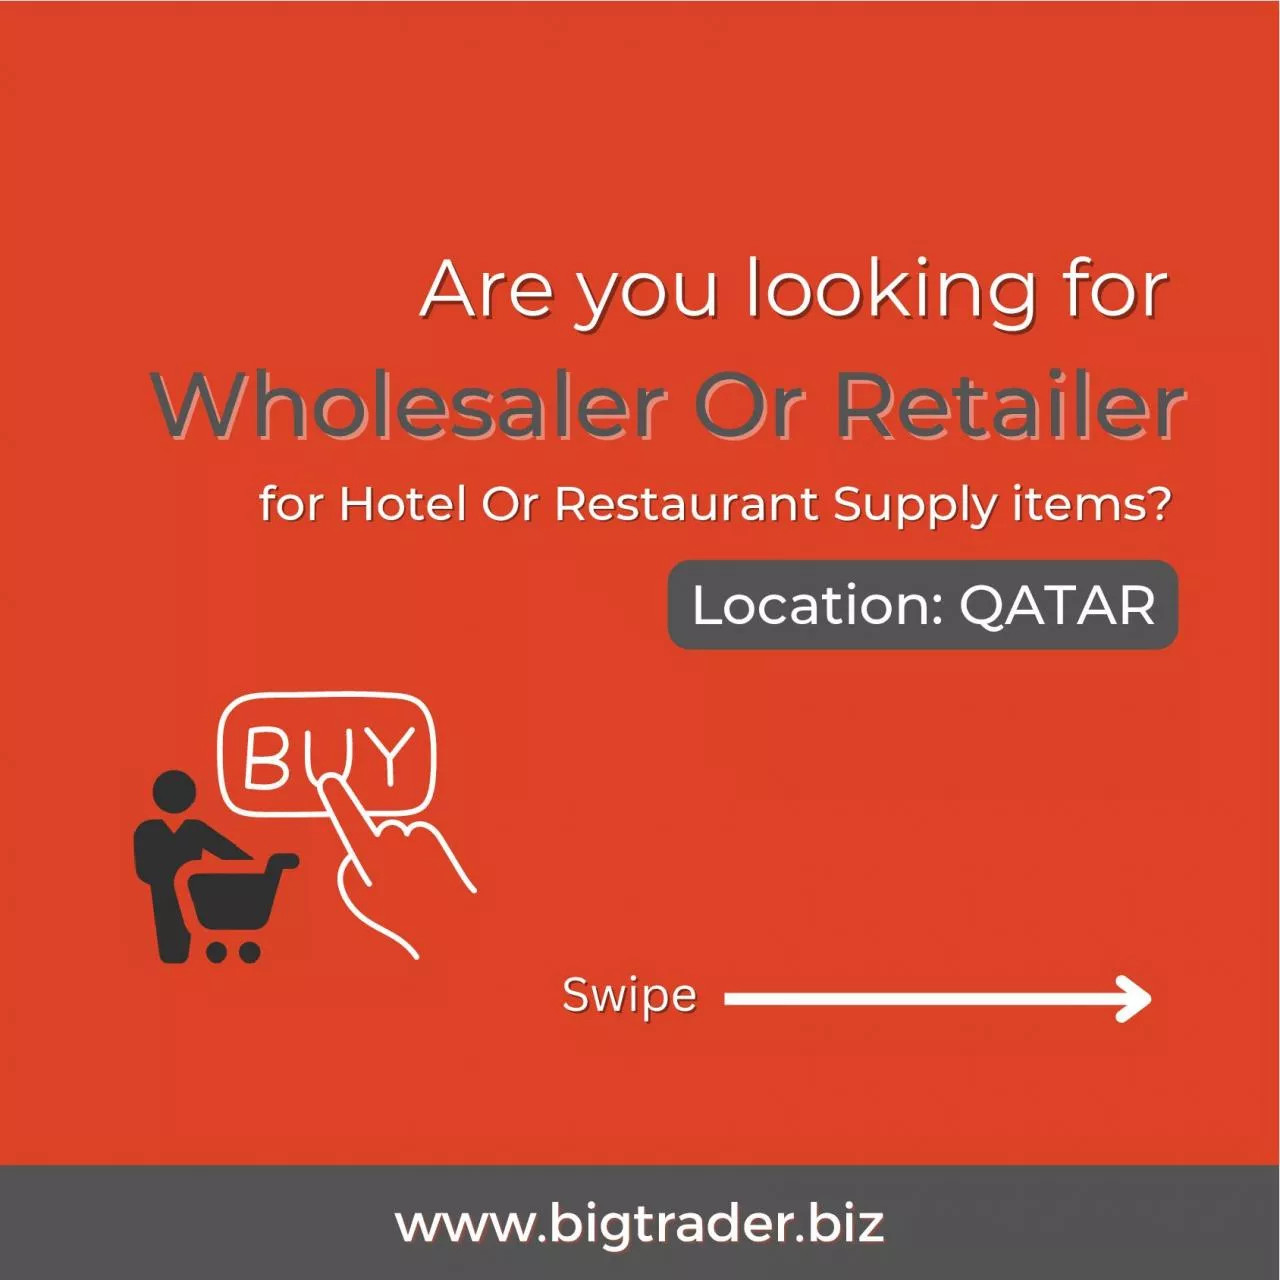 Wholesale b2b marketplace in Qatar | Buy wholesale cafe and restaurant supply items.